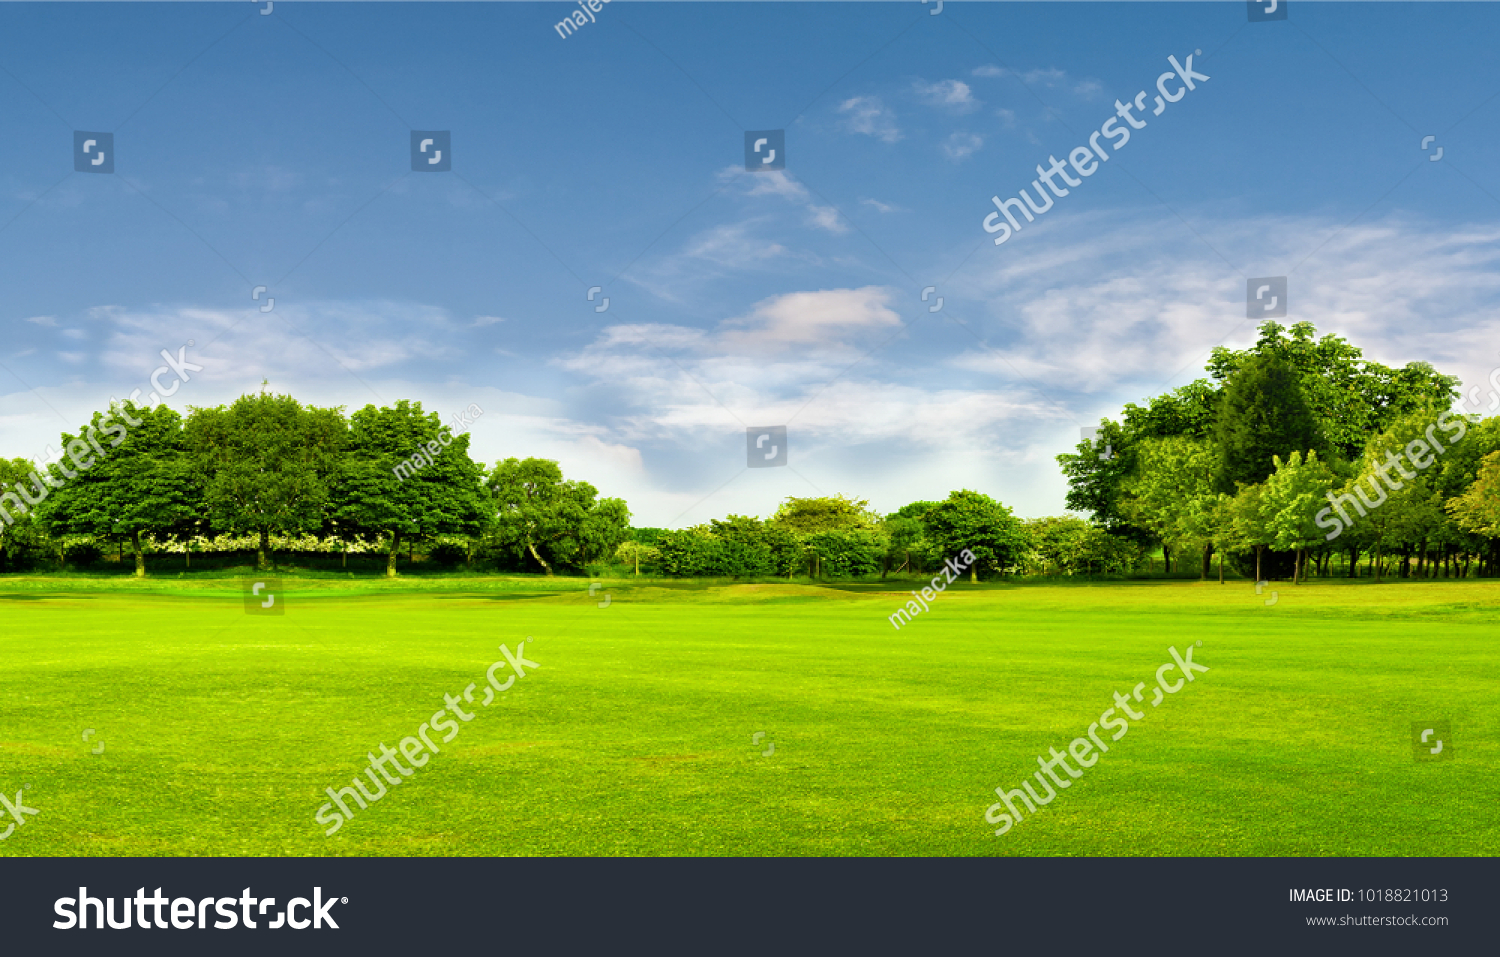 Green field, tree and blue sky.Great as a background,web banner #1018821013